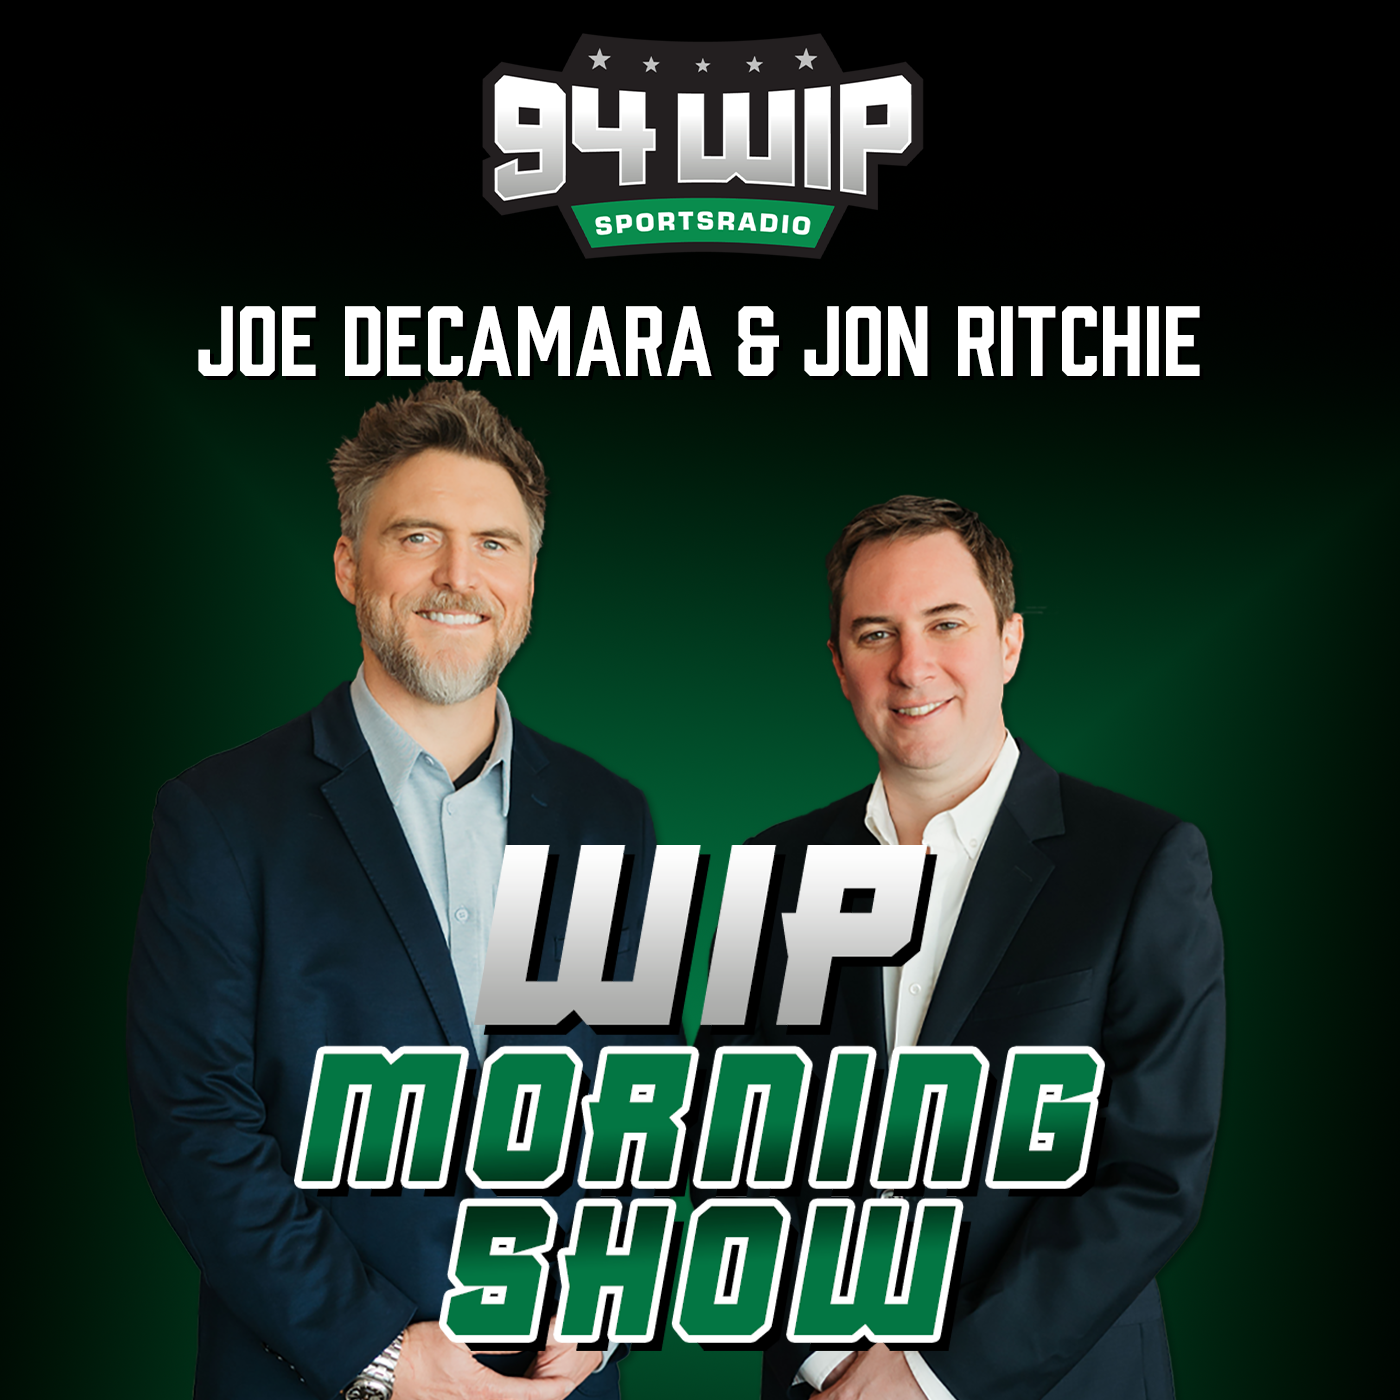 Howard Eskin joins the show to discuss the Phillies NLCS Game 3 and preview Eagles vs Dolphins